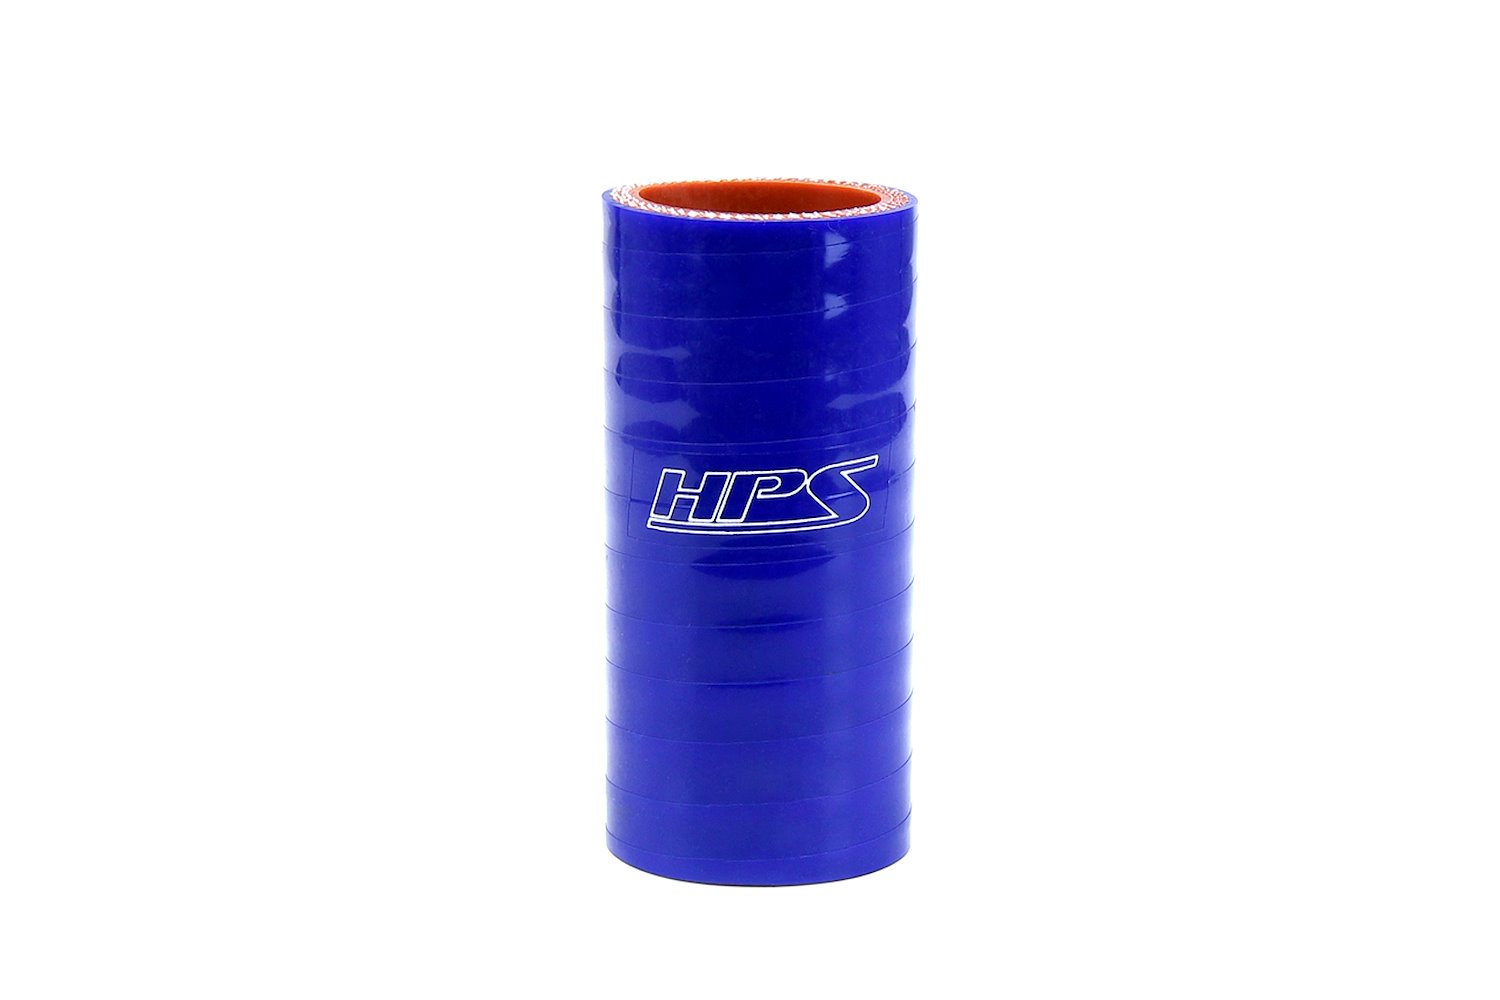 HTSC-125-BLUE Silicone Coupler Hose, High-Temp 4-Ply Reinforced, 1-1/4 in. ID, 3 in. Long, Blue